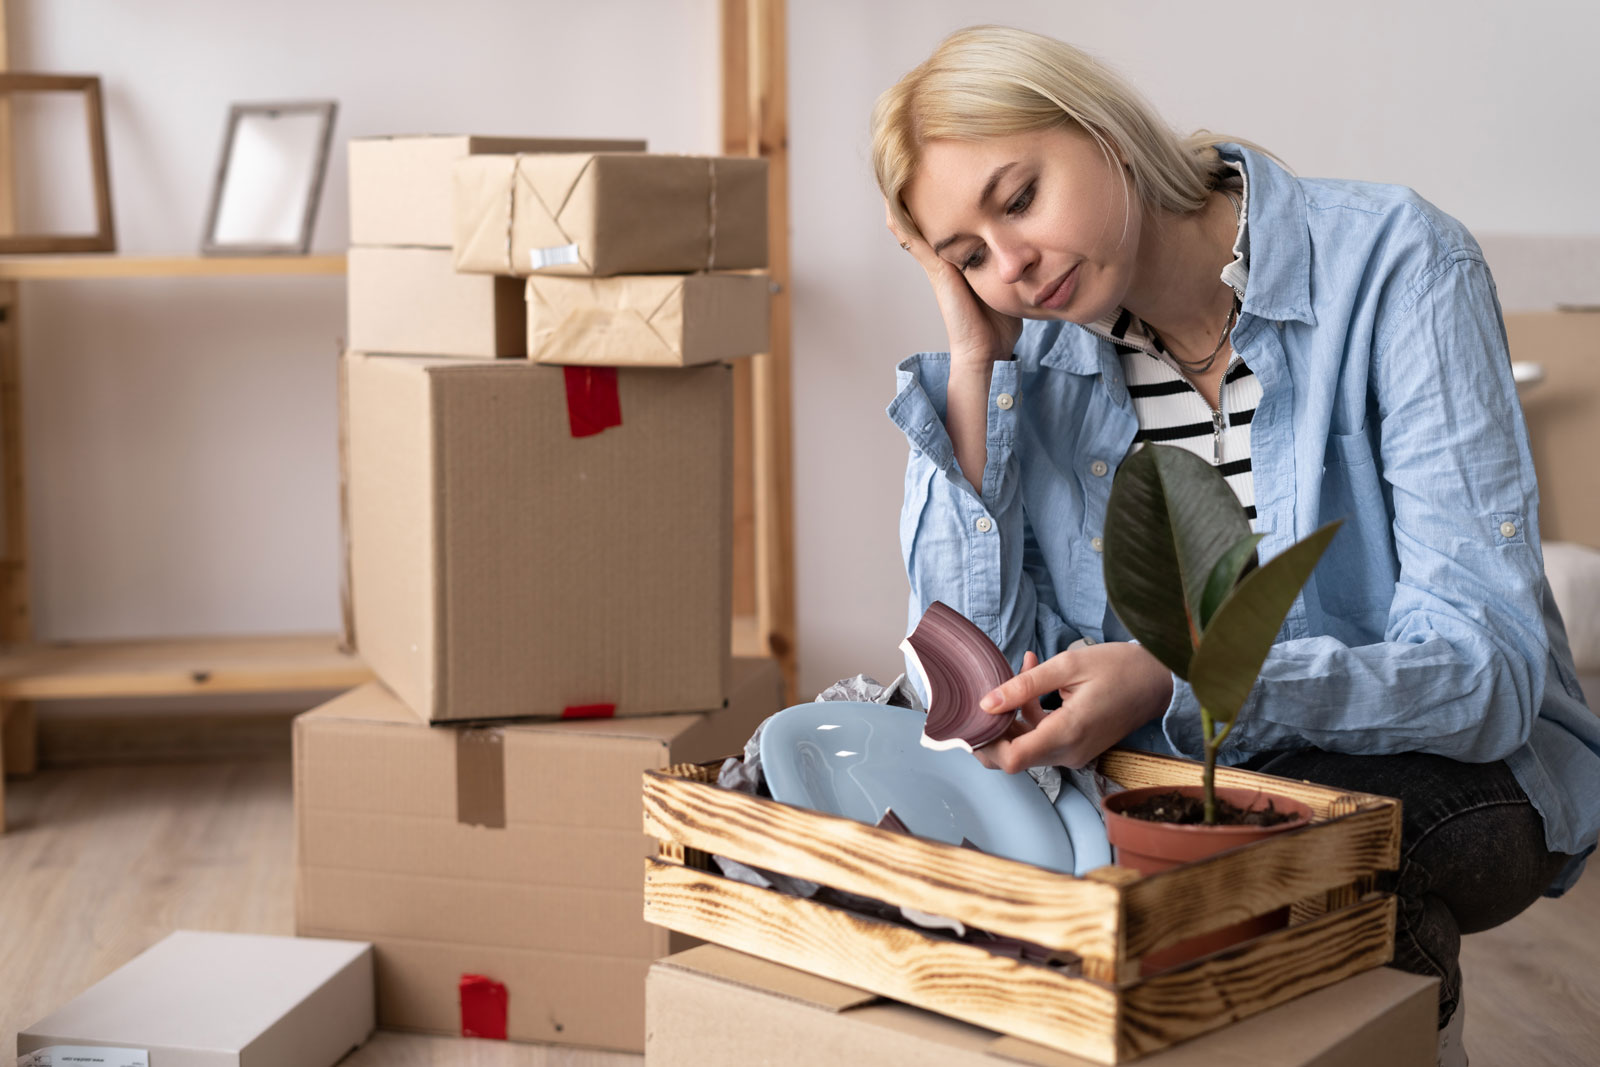 Woman looking at damaged items while attempting to move herself